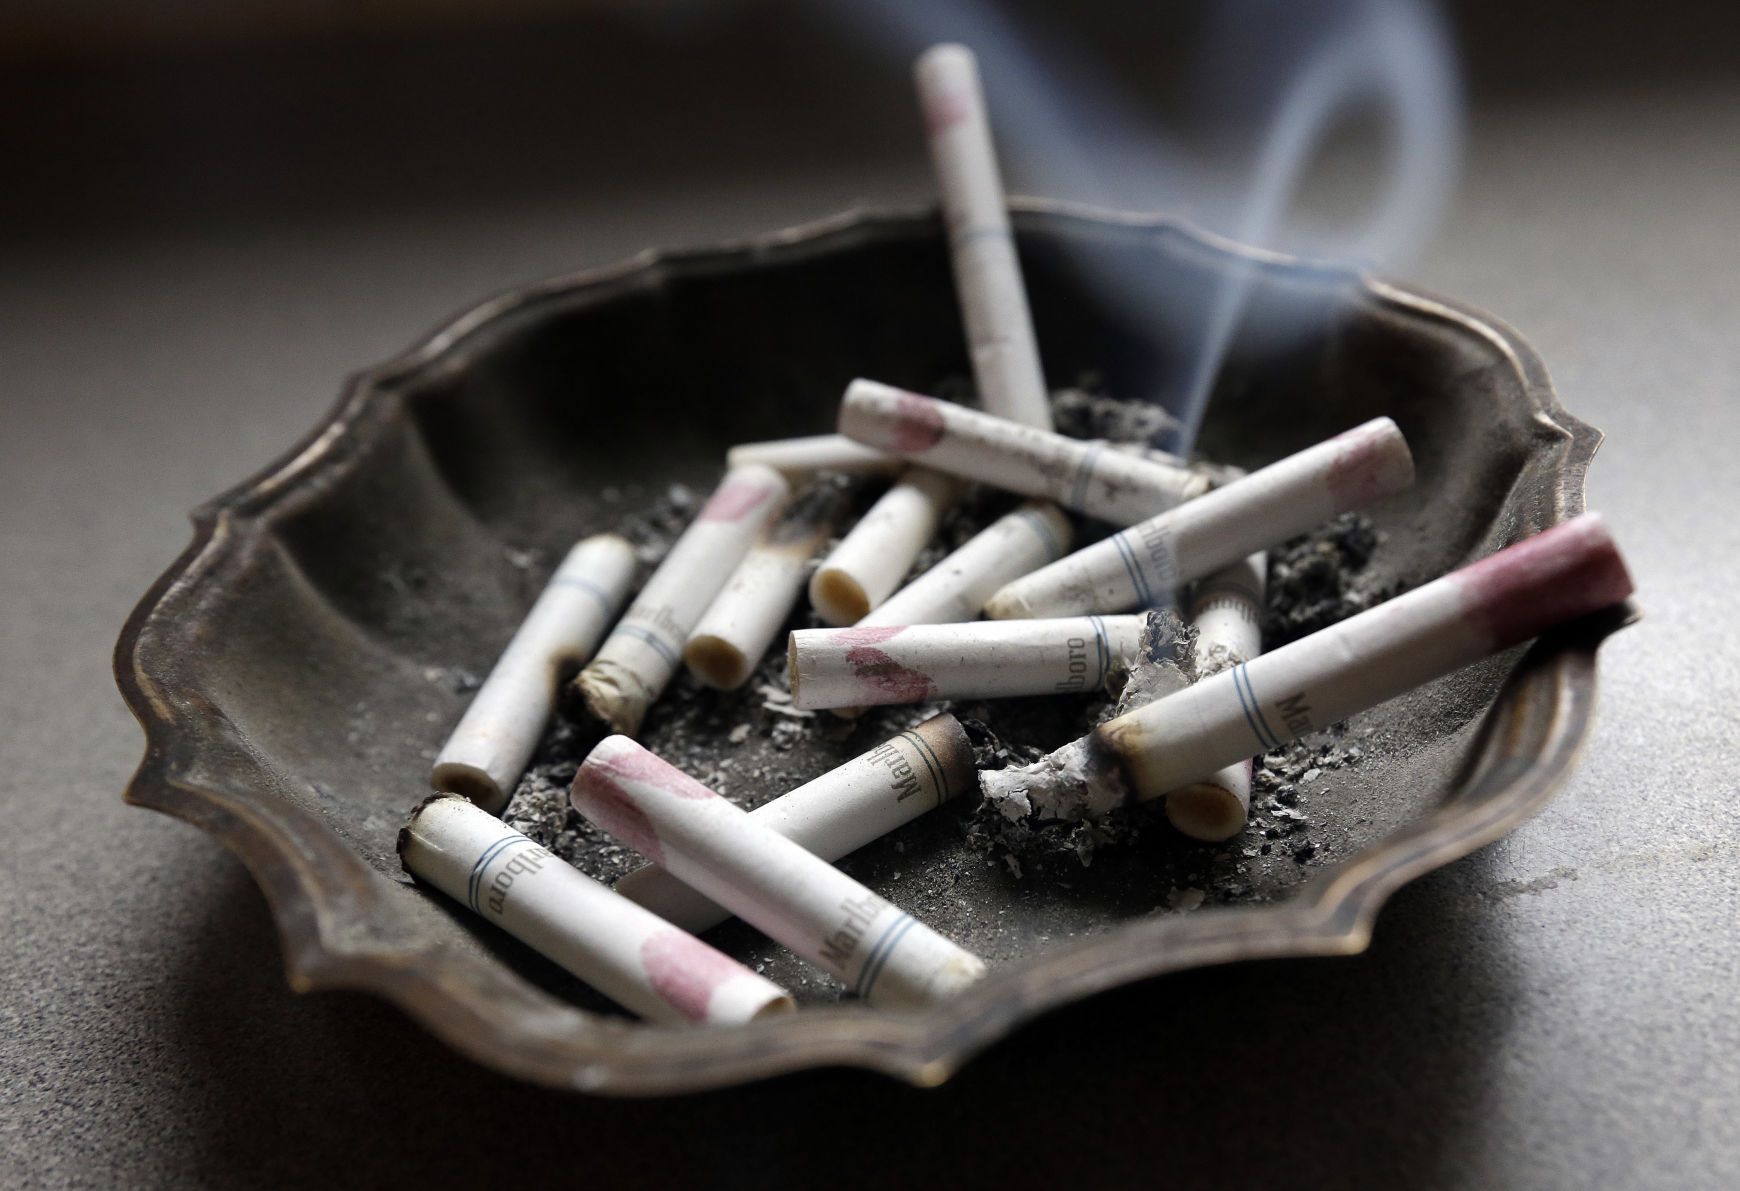 Cigarette butts in an ashtray - Smoke